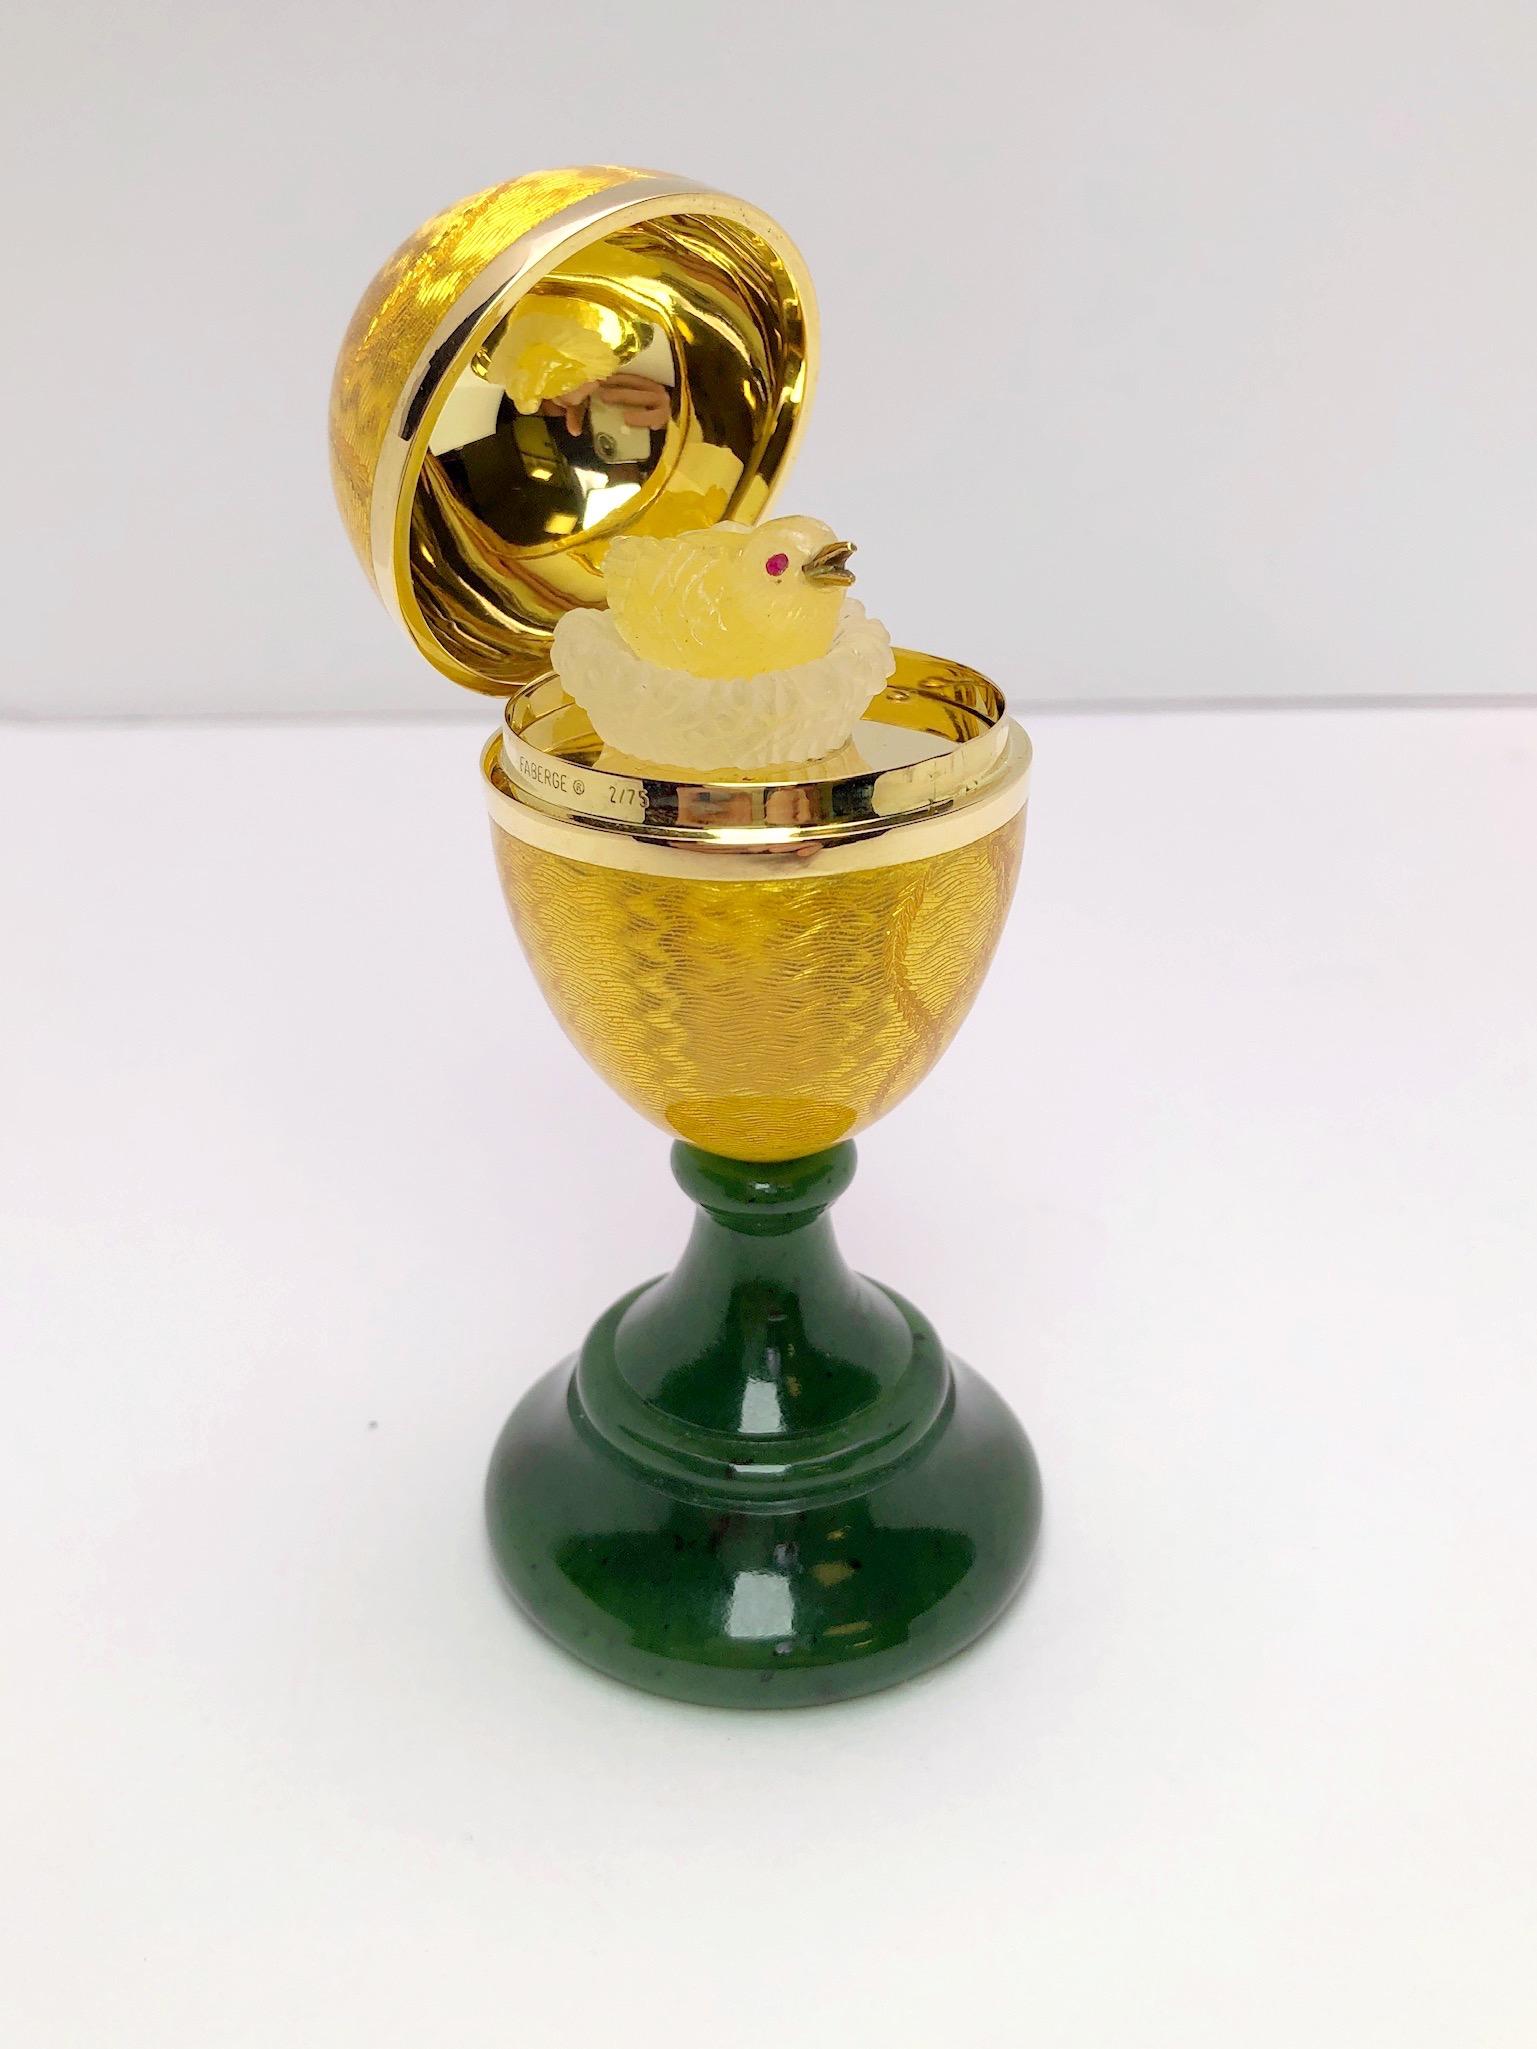 Modern Faberge Enamel and Yellow Gold Ltd. Edition Surprise Egg with Chick 1